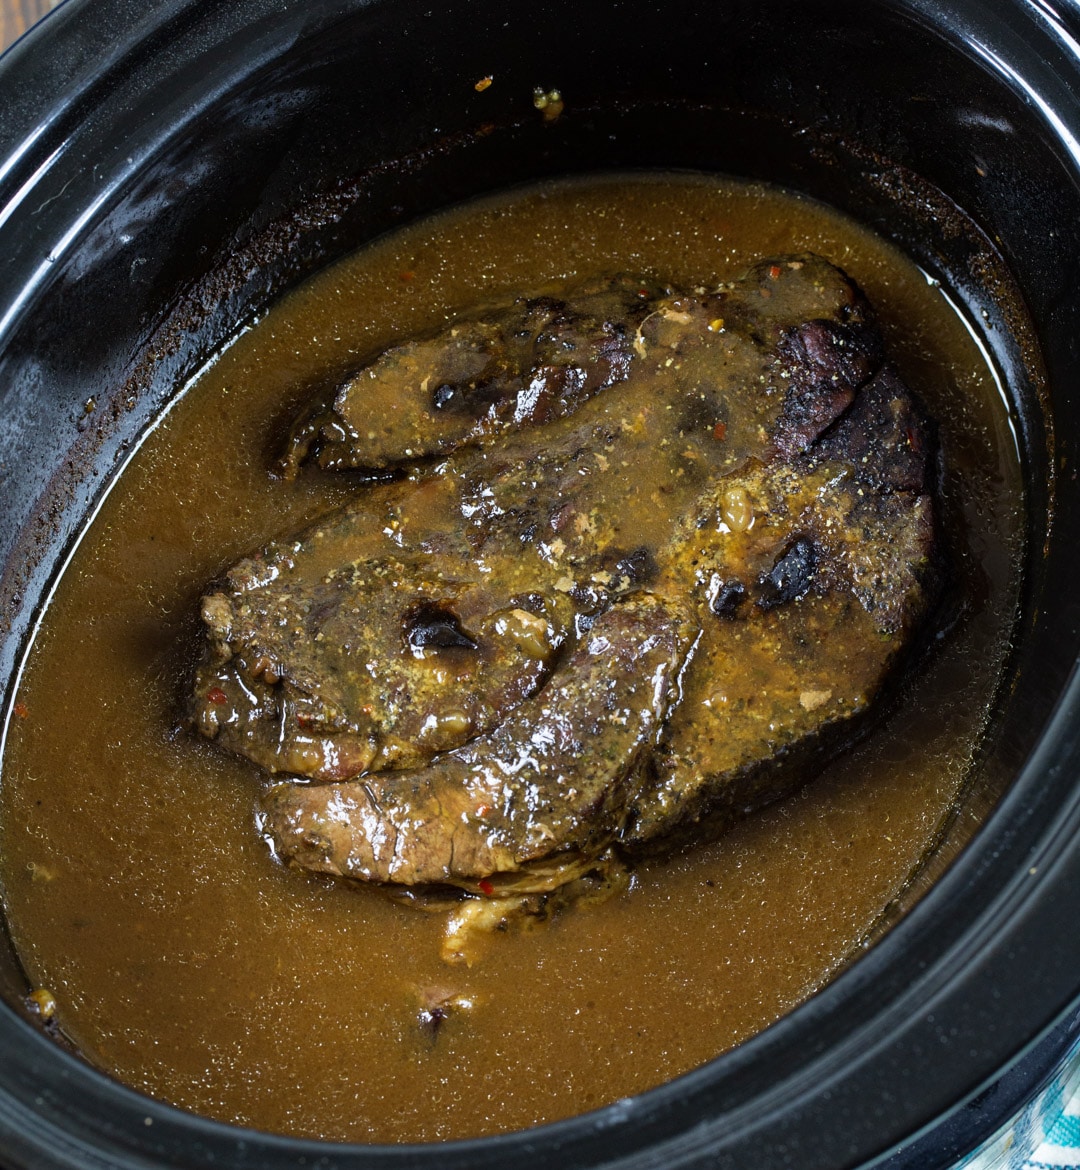 Cooked Pot Roast in a slow cooker.